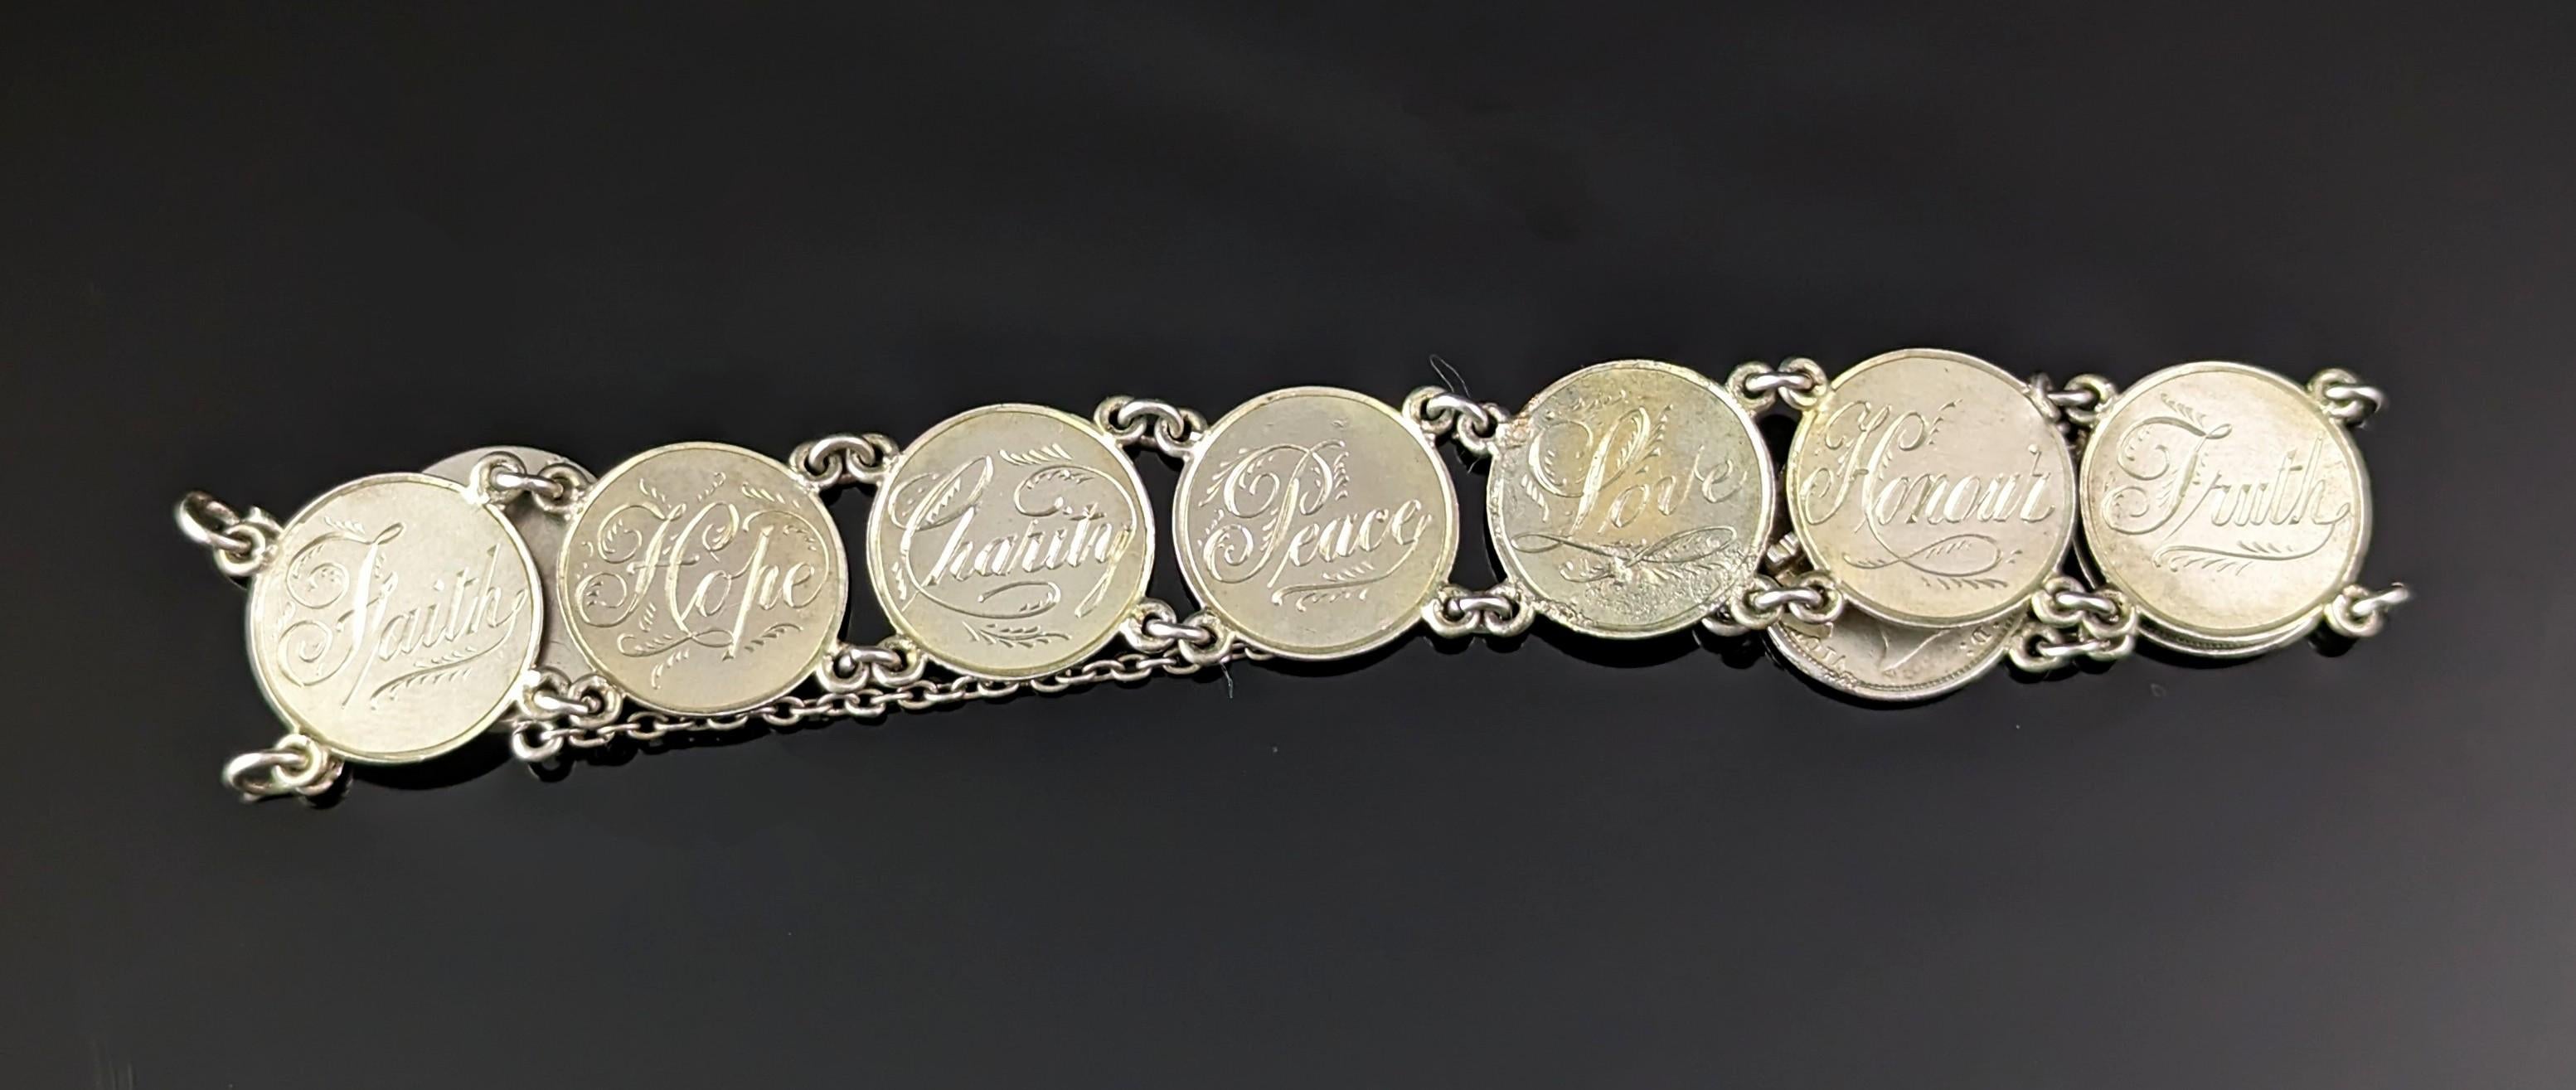 Such a beautiful and romantic sentiment is this antique original Victorian love token bracelet.

It is made up from a number of Victorian silver coins, smoothed on one side and engraved with various messages of love.

The coins are engraved: Faith,